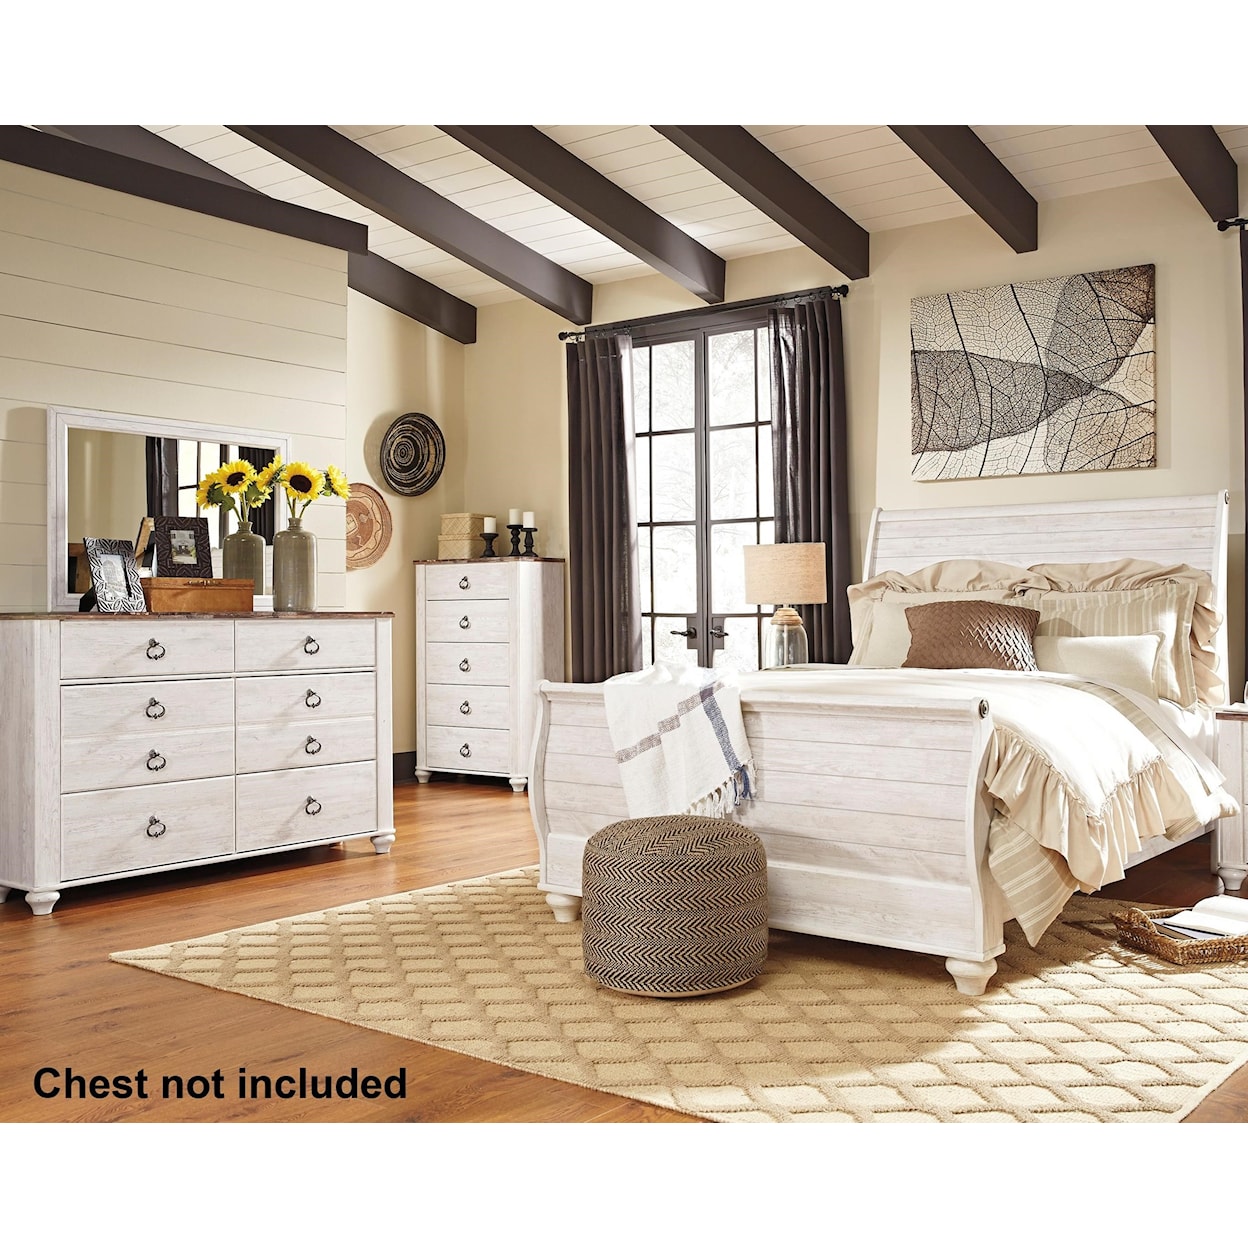 Signature Design by Ashley Willowton Queen Bedroom Group